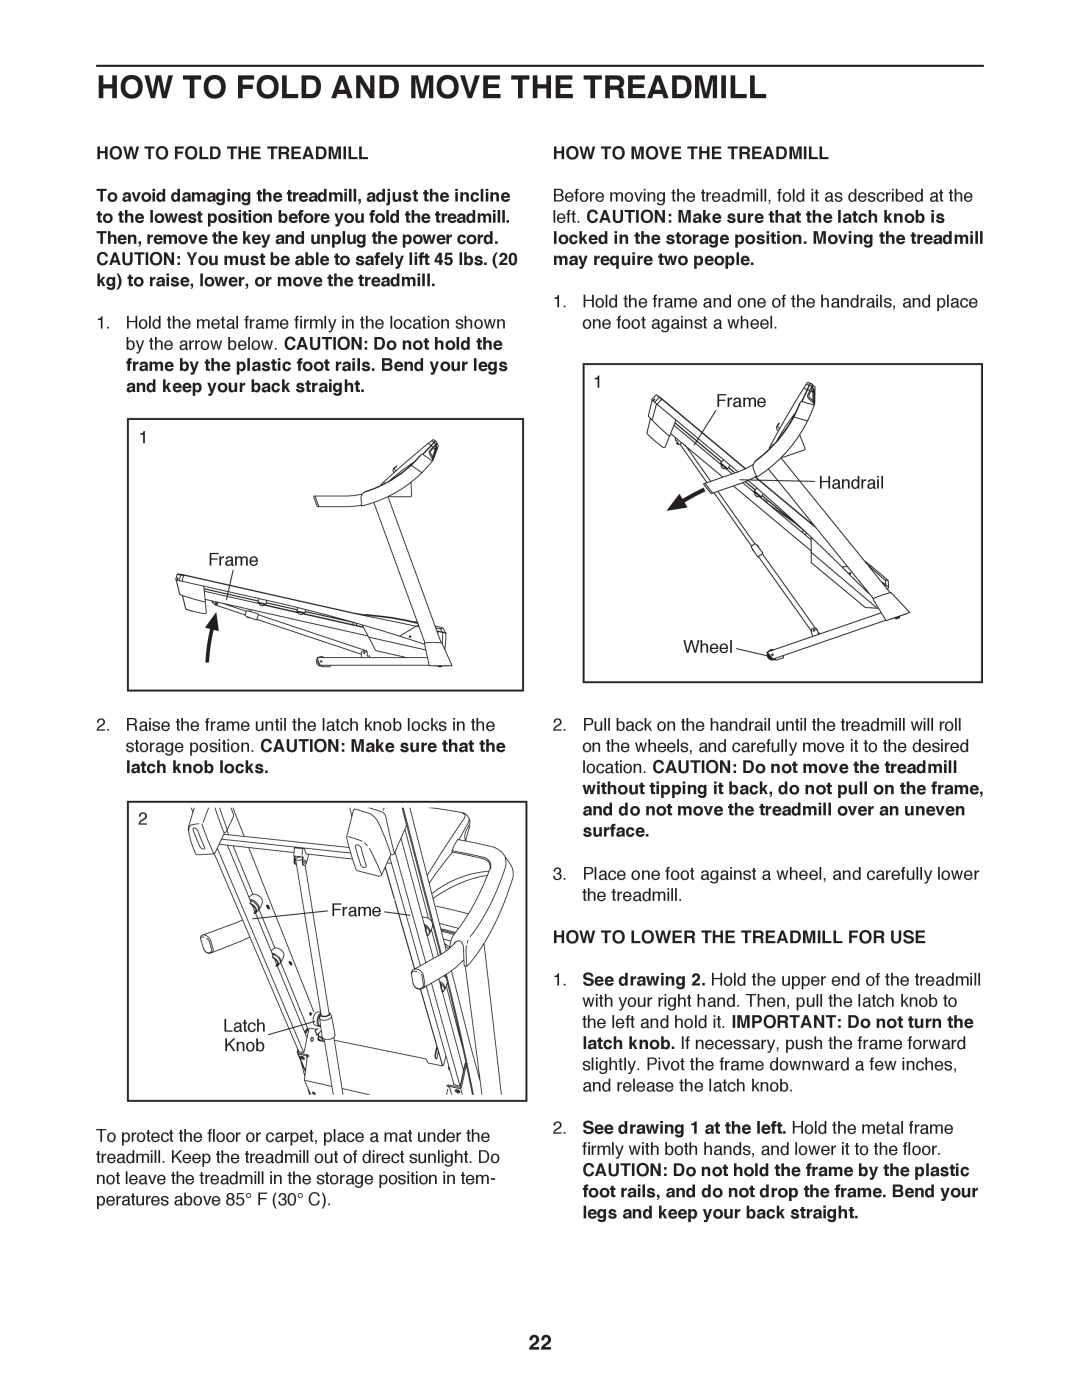 Sears NTL61011.1 user manual How To Fold And Move The Treadmill, How To Fold The Treadmill, How To Move The Treadmill 